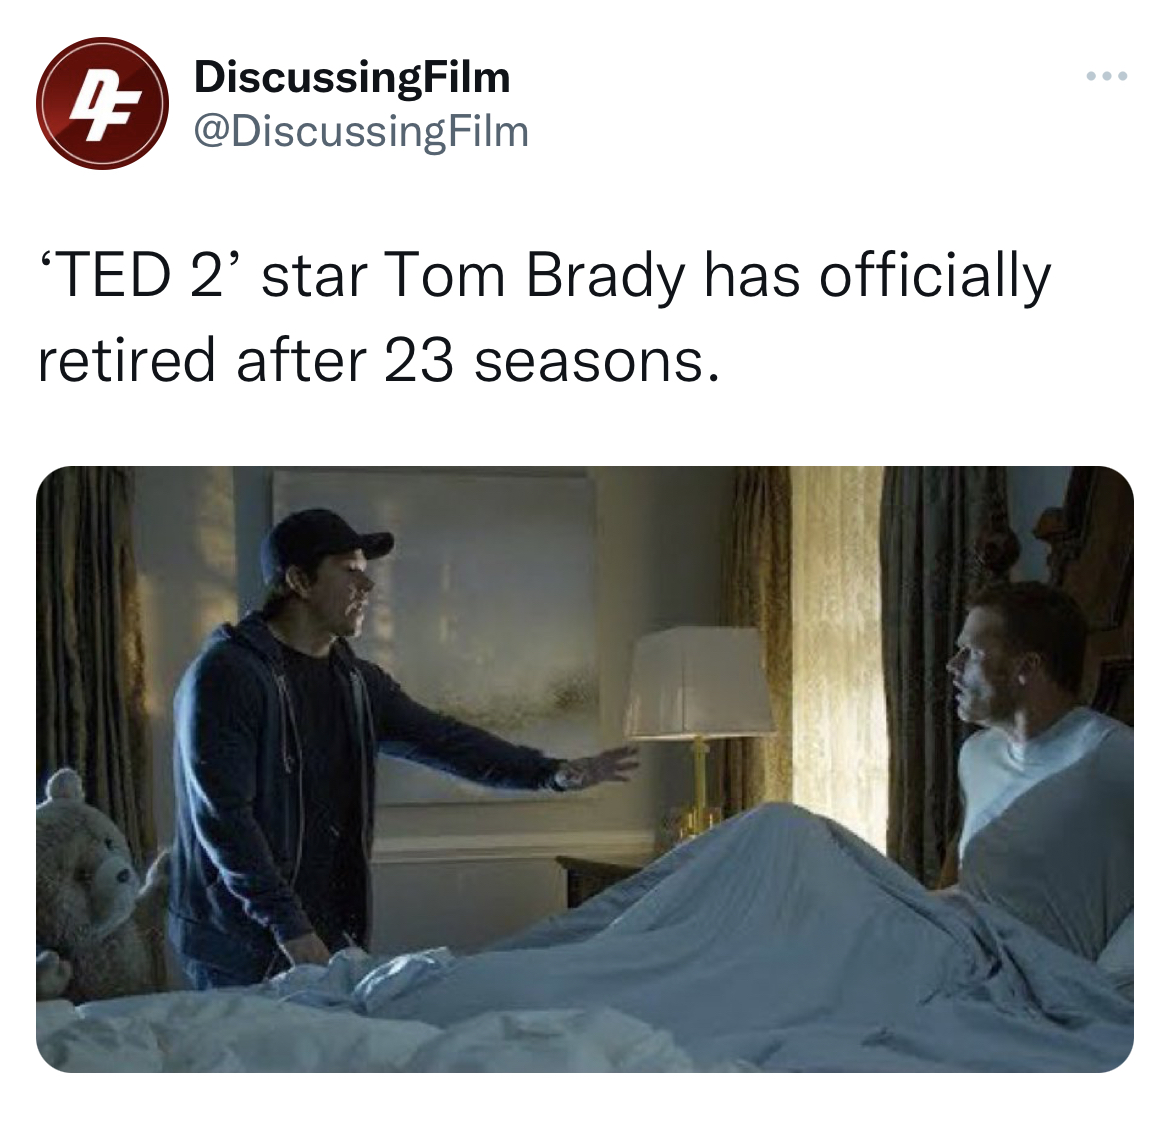 Tom Brady Retirement memes - DiscussingFilm Film 4 'Ted 2' star dy has officially retired after 23 seasons.